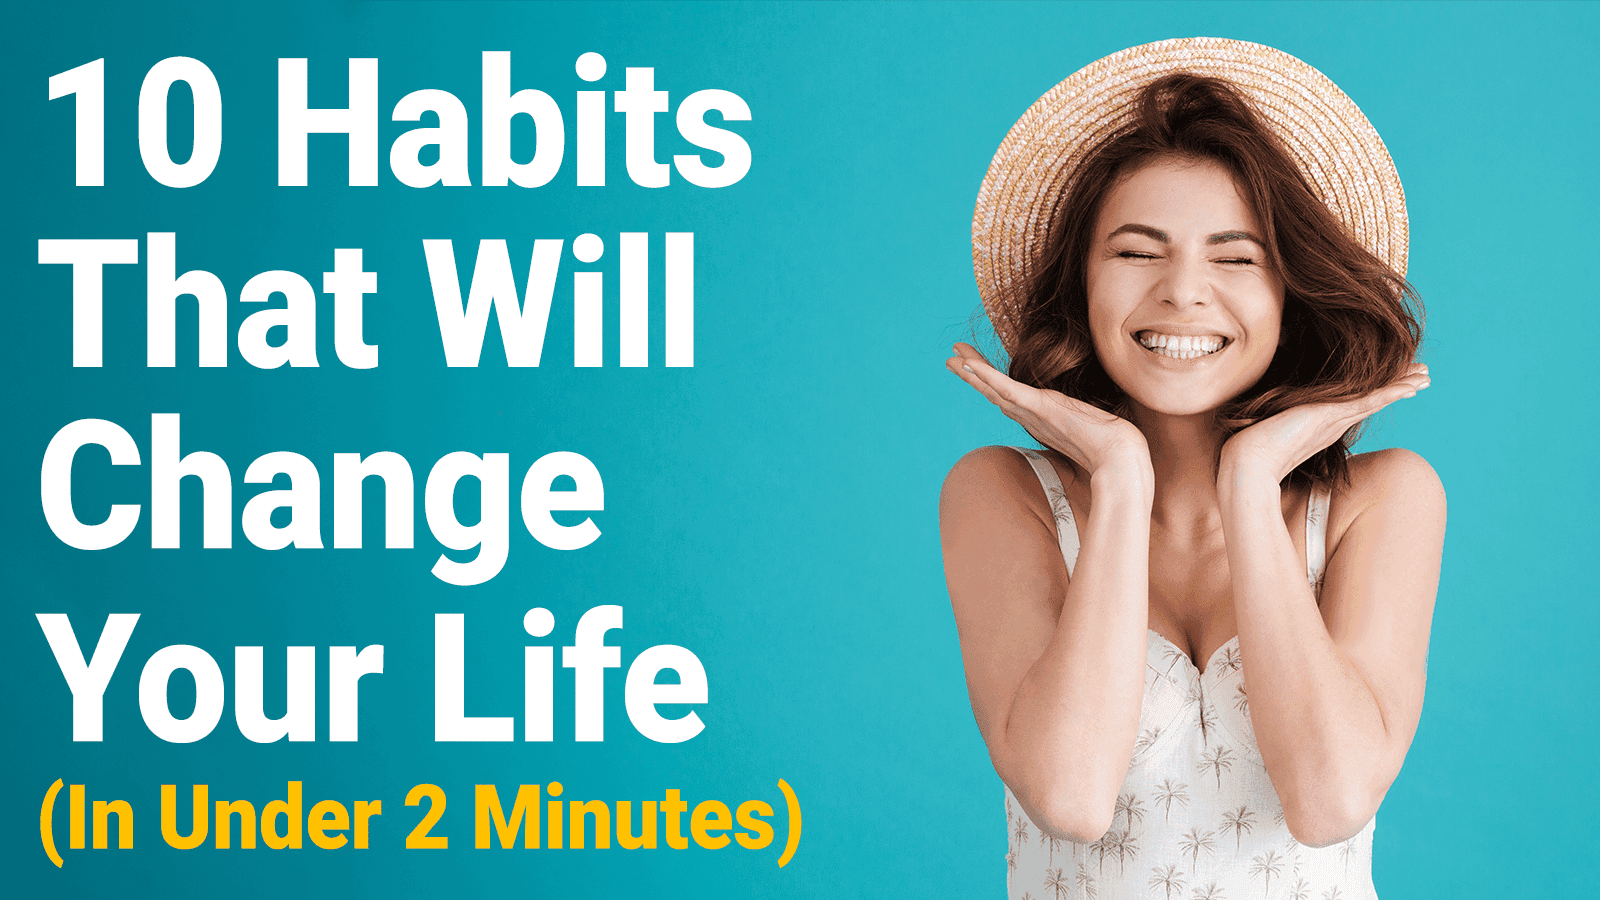 10 Habits That Will Change Your Life (In Under 2 Minutes)